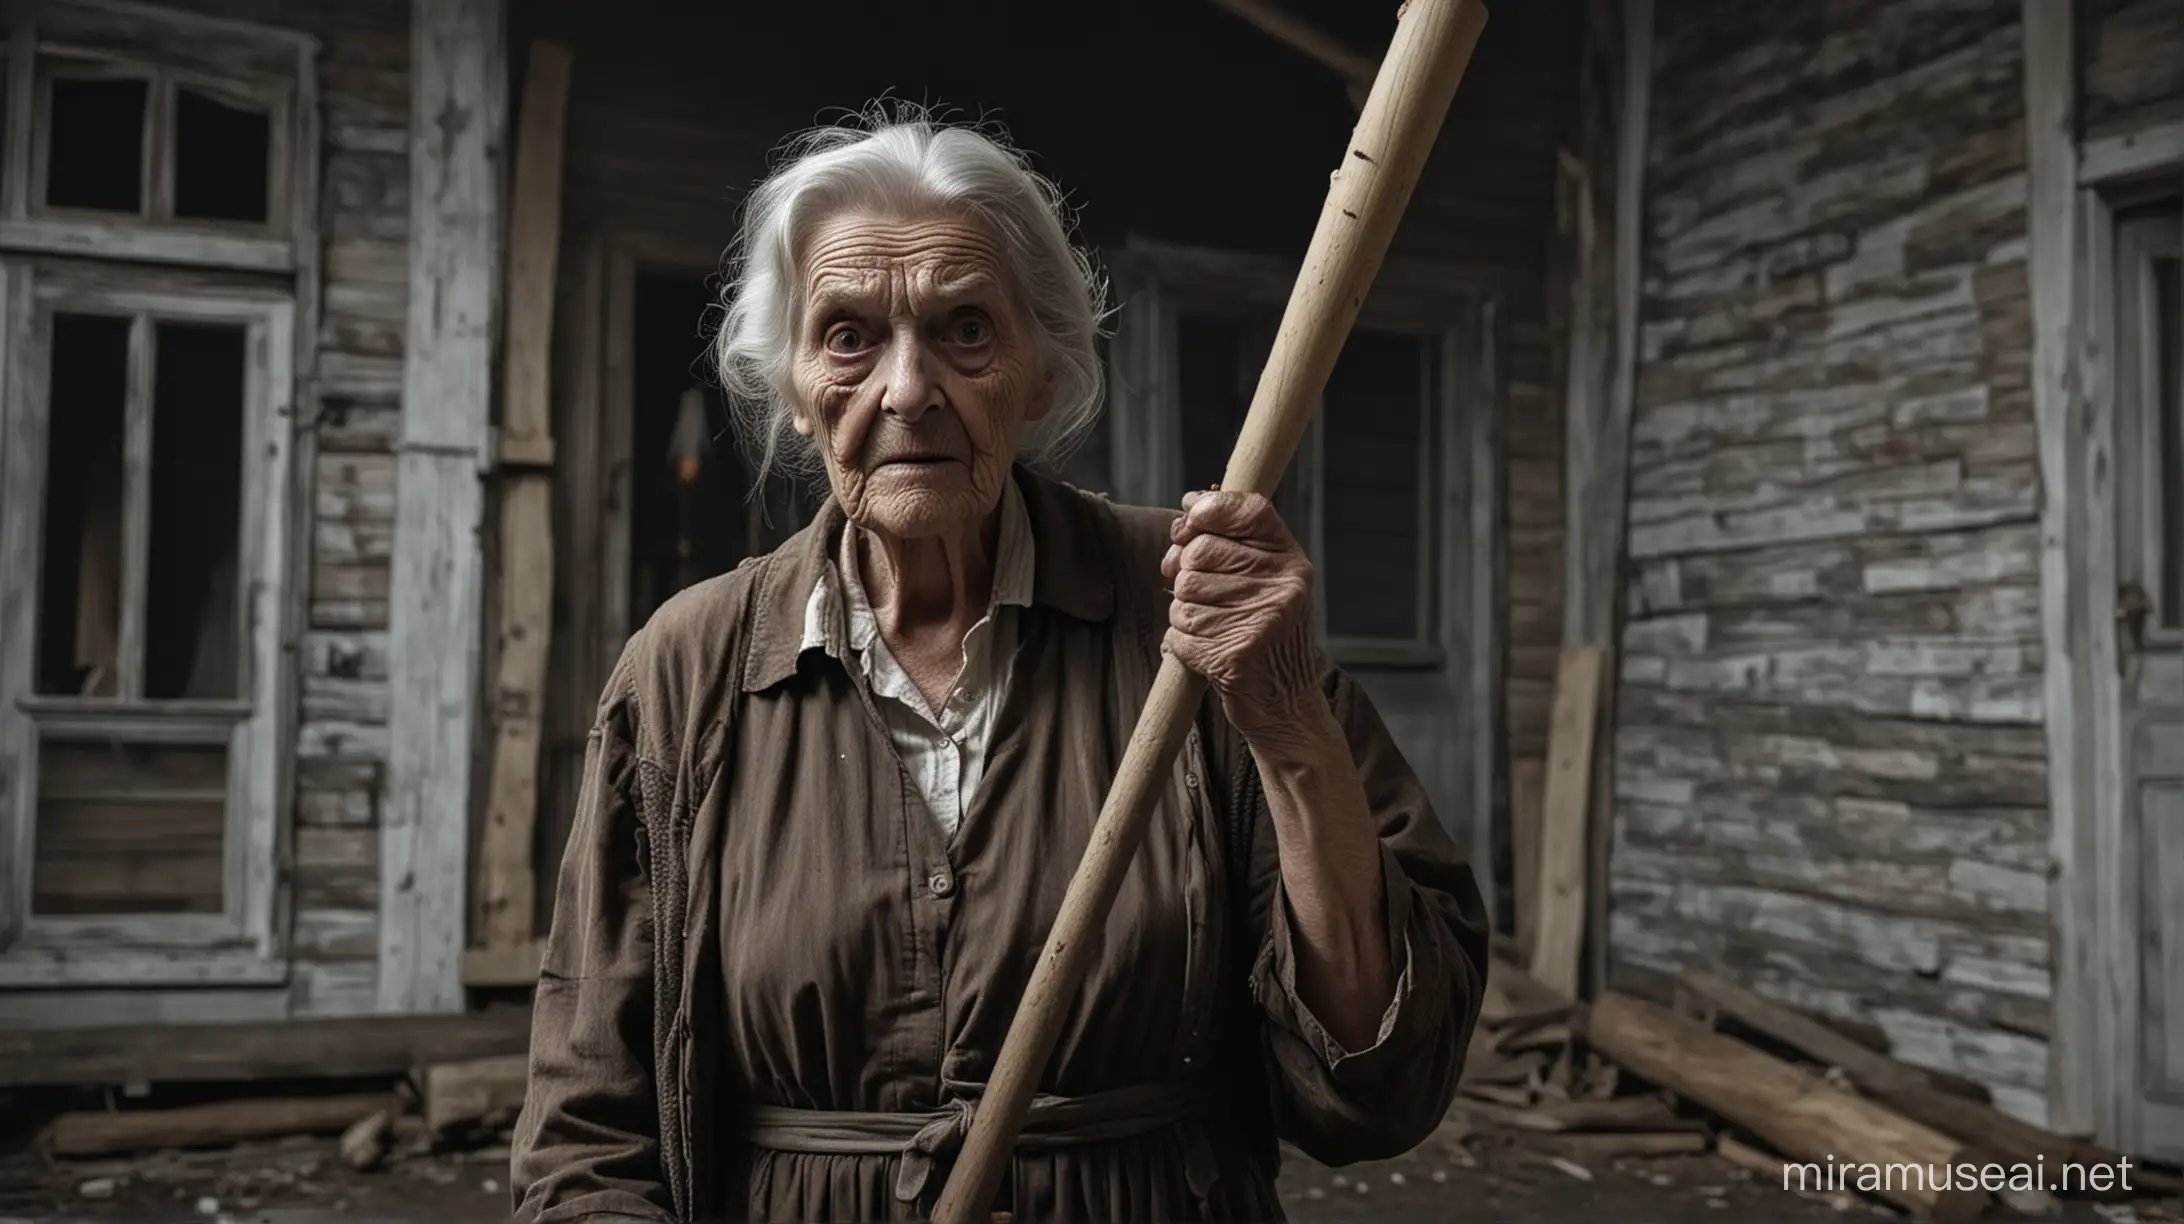 Elderly Woman with Baseball Bat in Spooky Wooden Mansion at Night